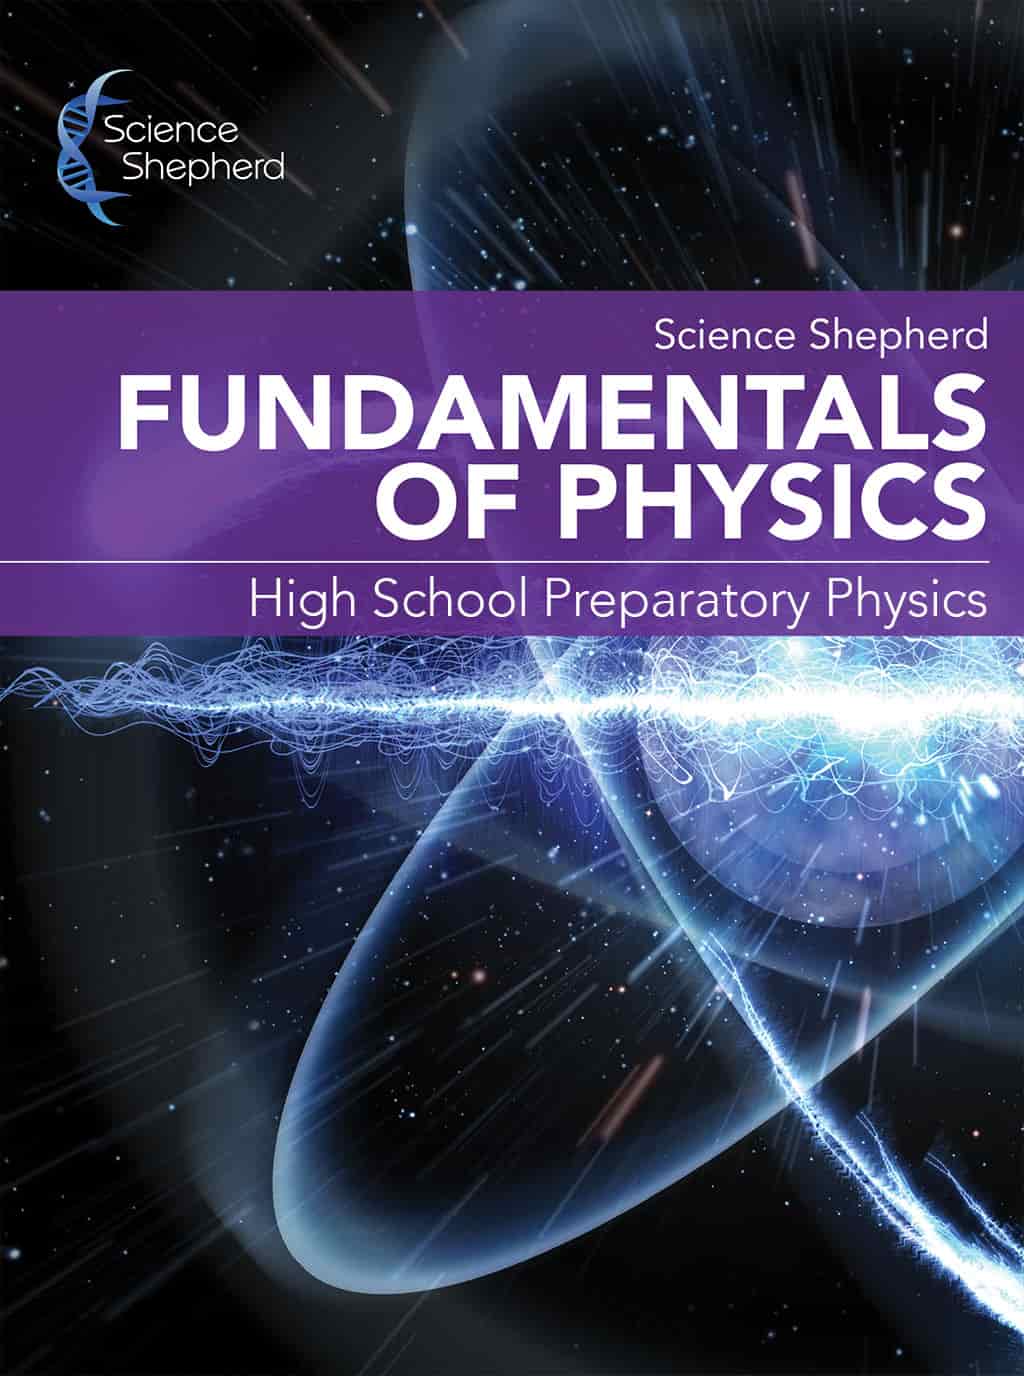 Fundamentals of Physics homeschool videos textbook cover of glowing blue atom